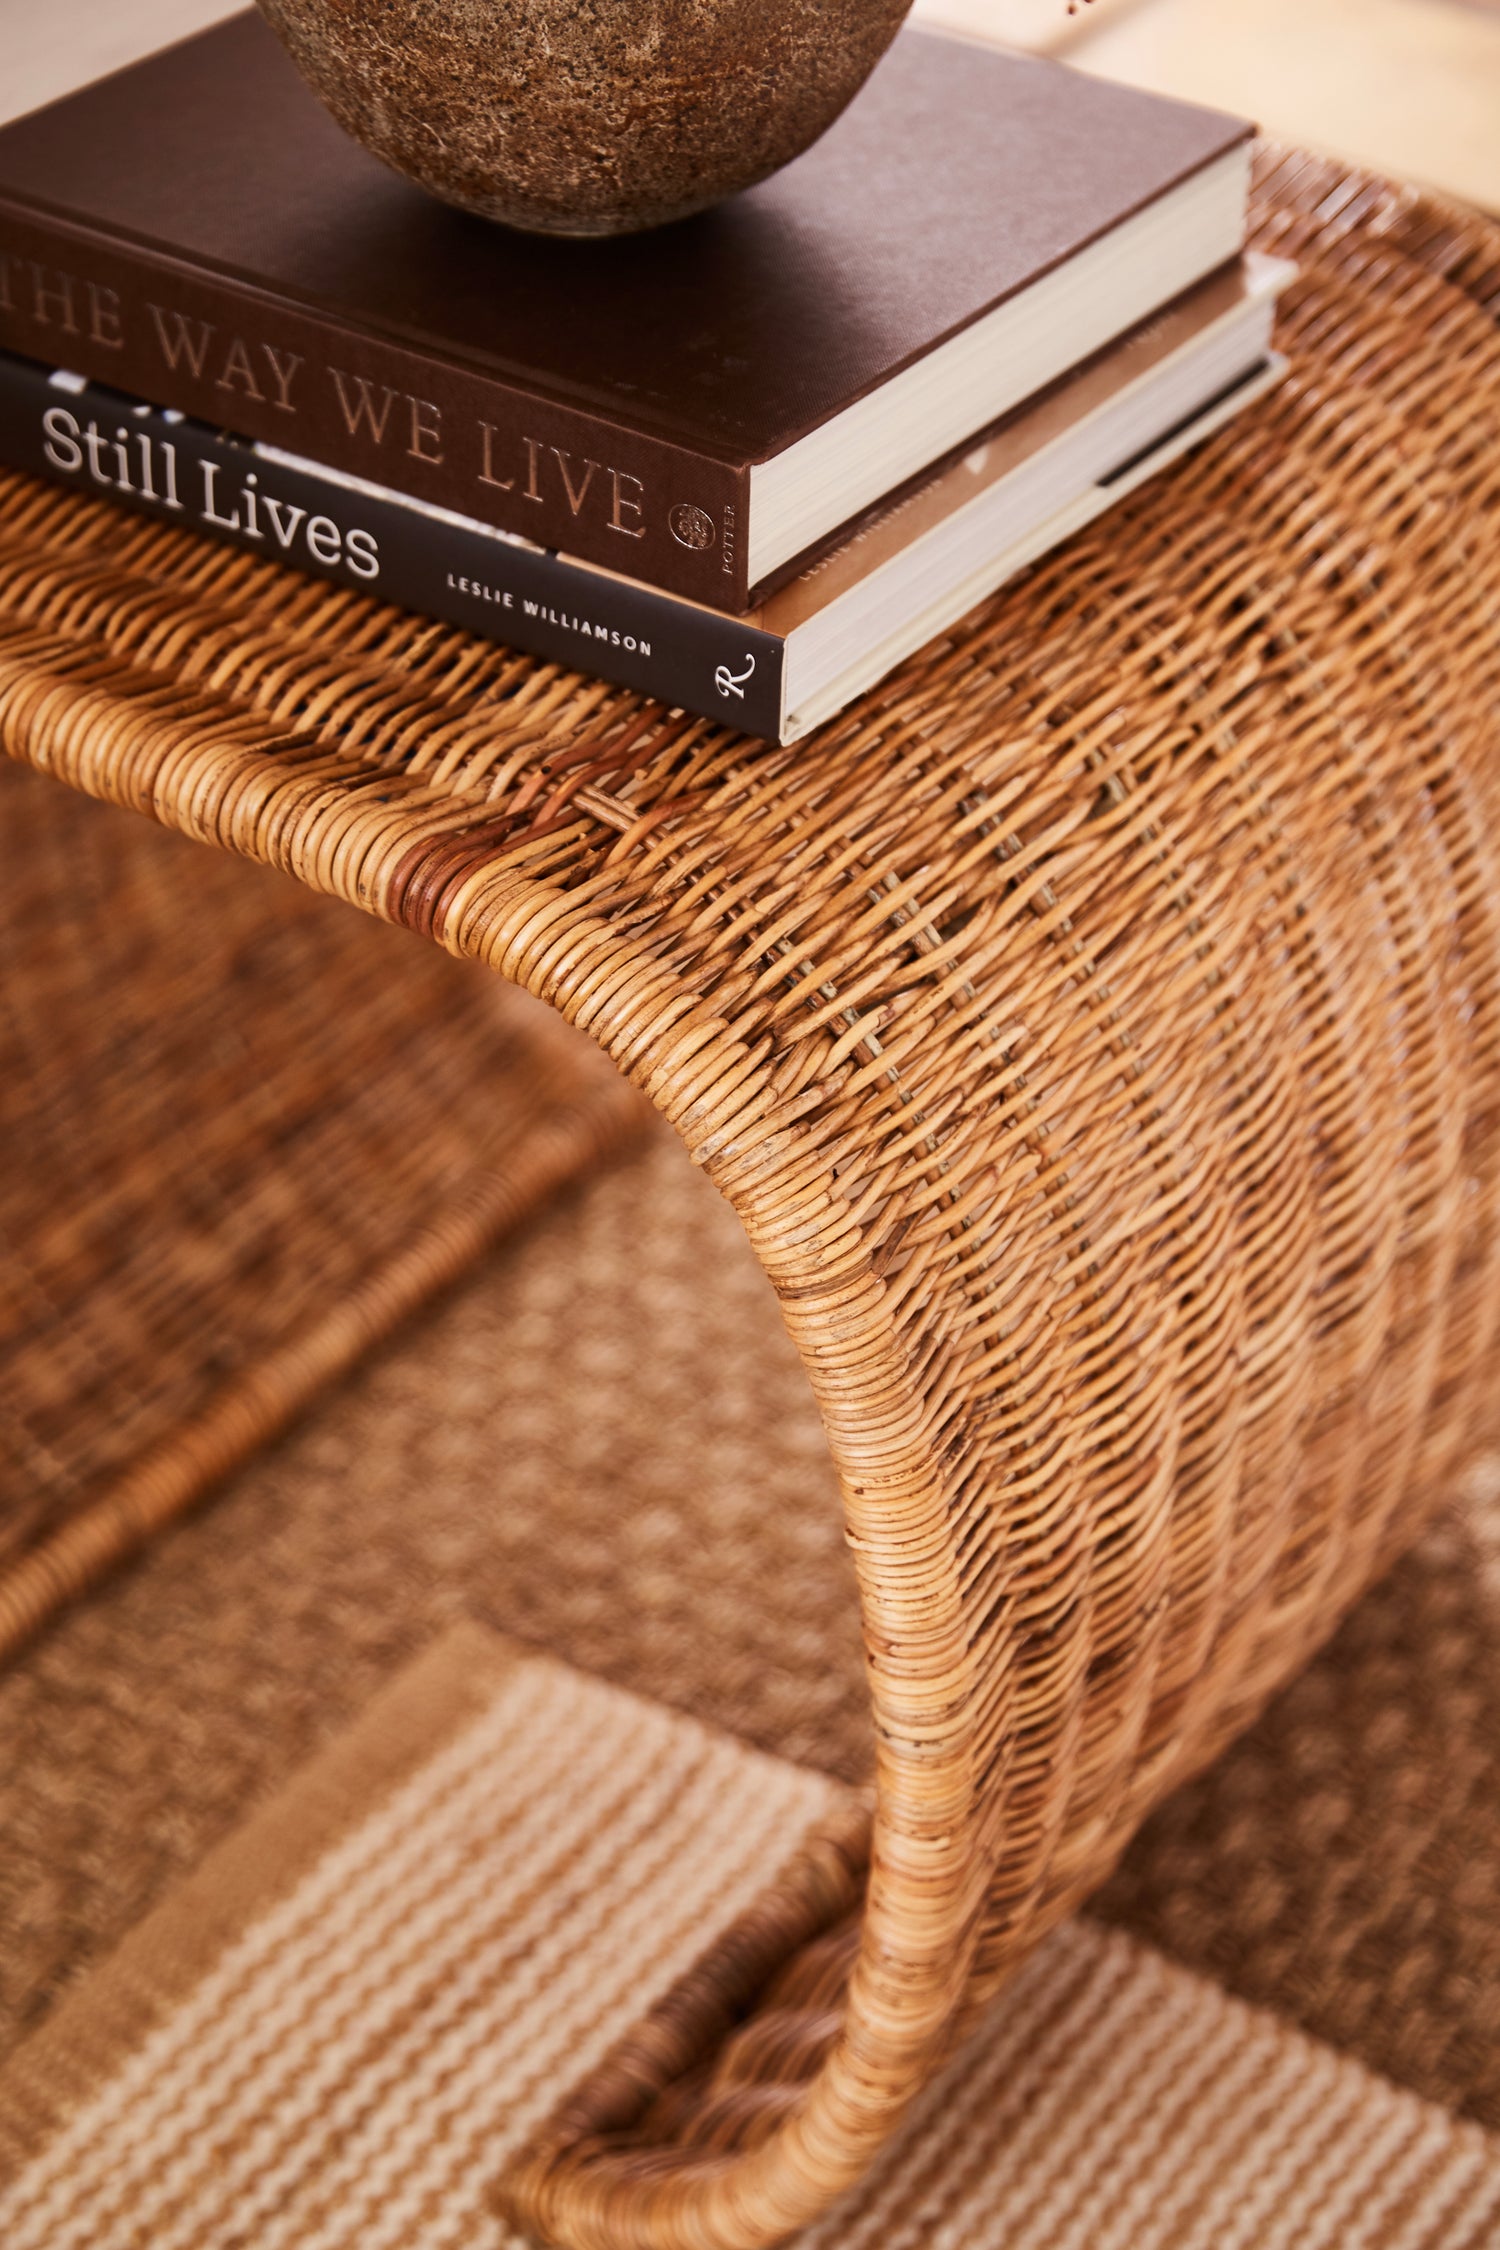 Healdsburg wicker side table with books